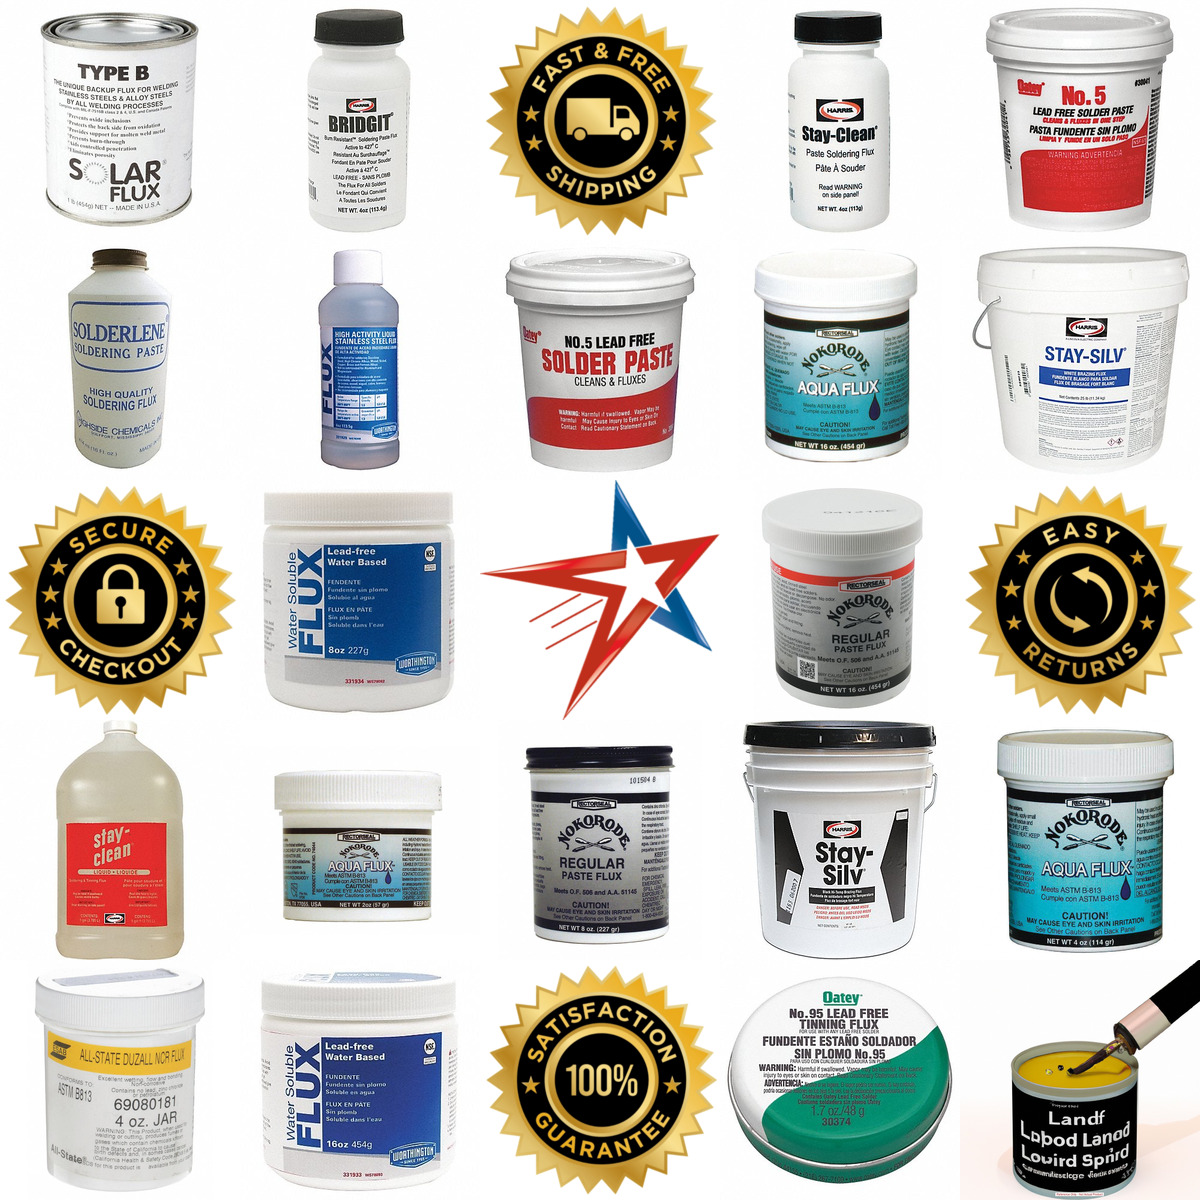 A selection of Soldering Flux Paste and Liquid products on GoVets